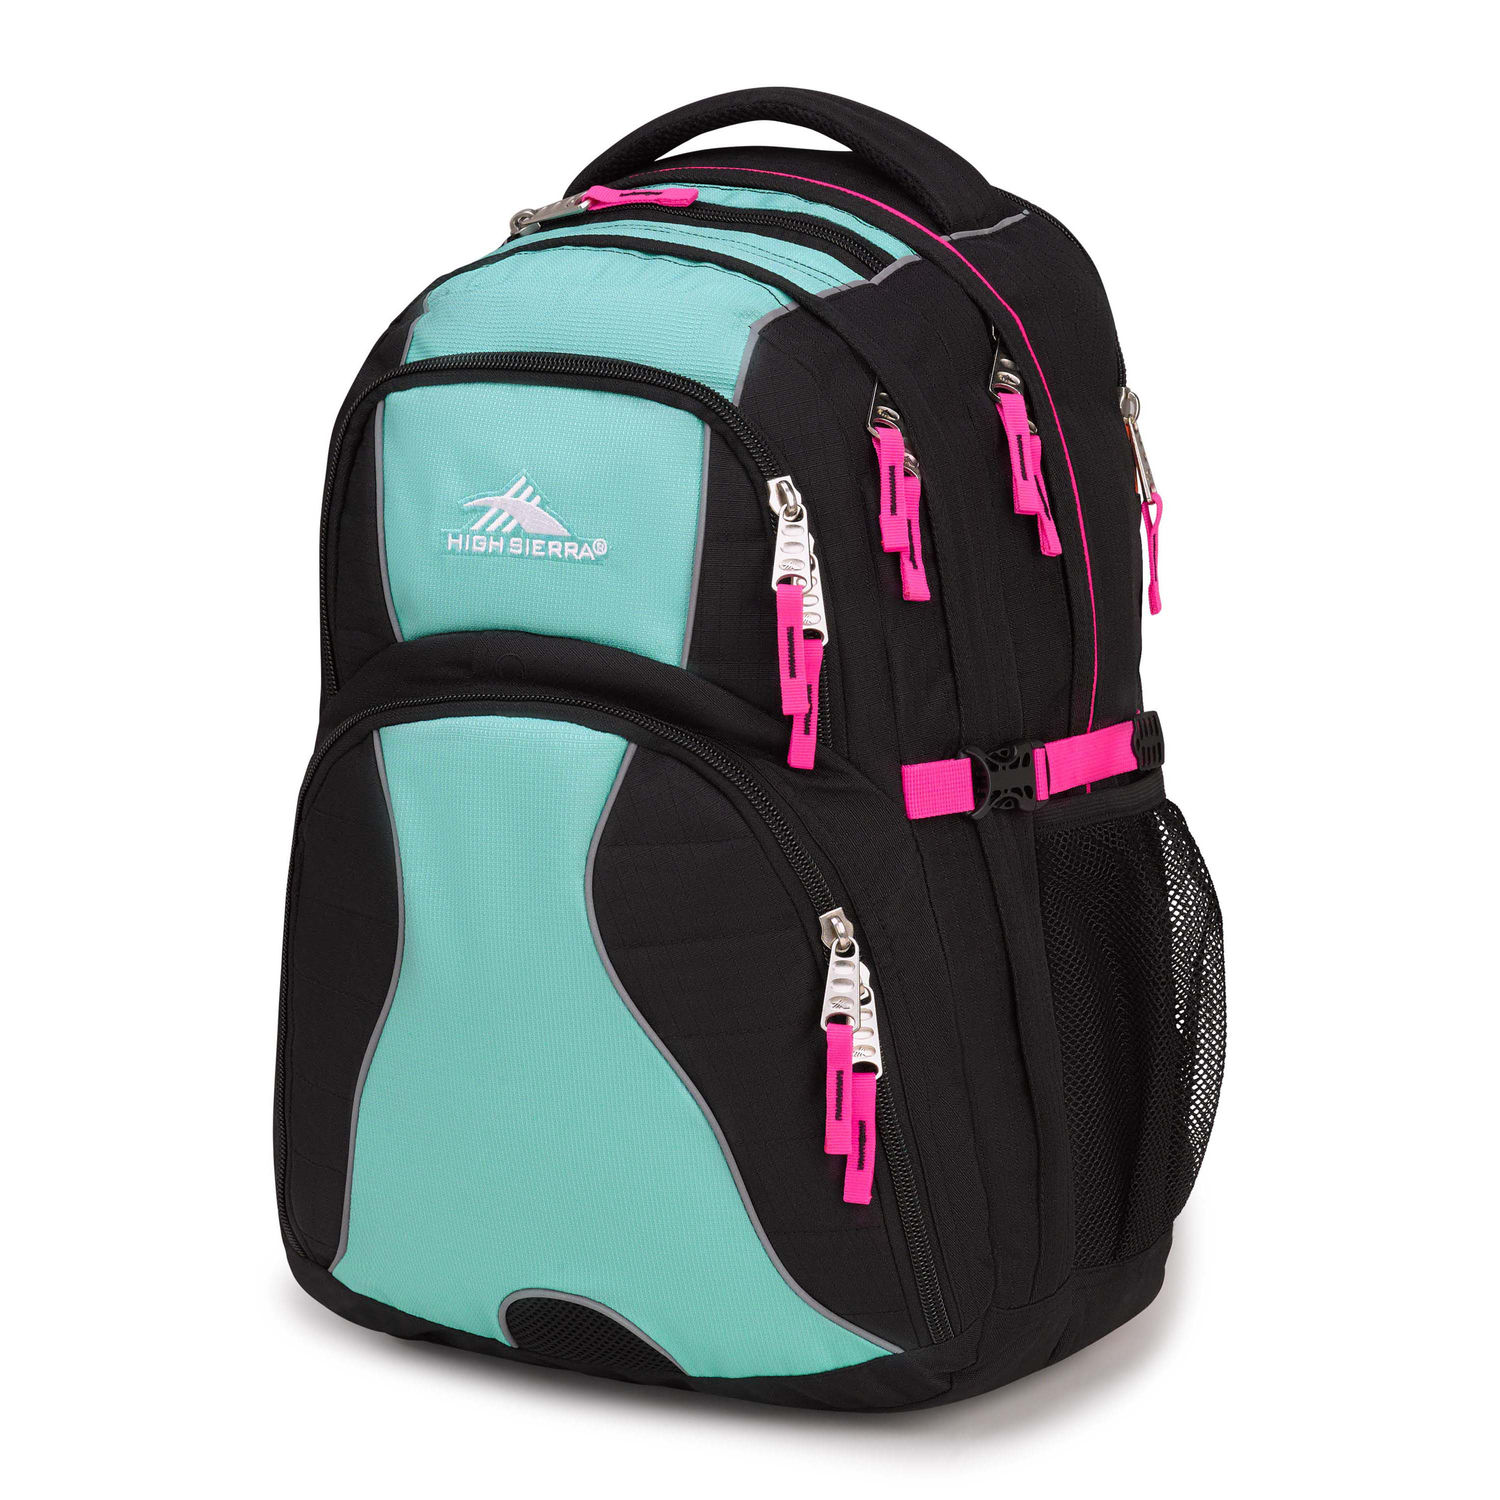 High Sierra: Buy one, get one 50% off backpacks and lunch boxes